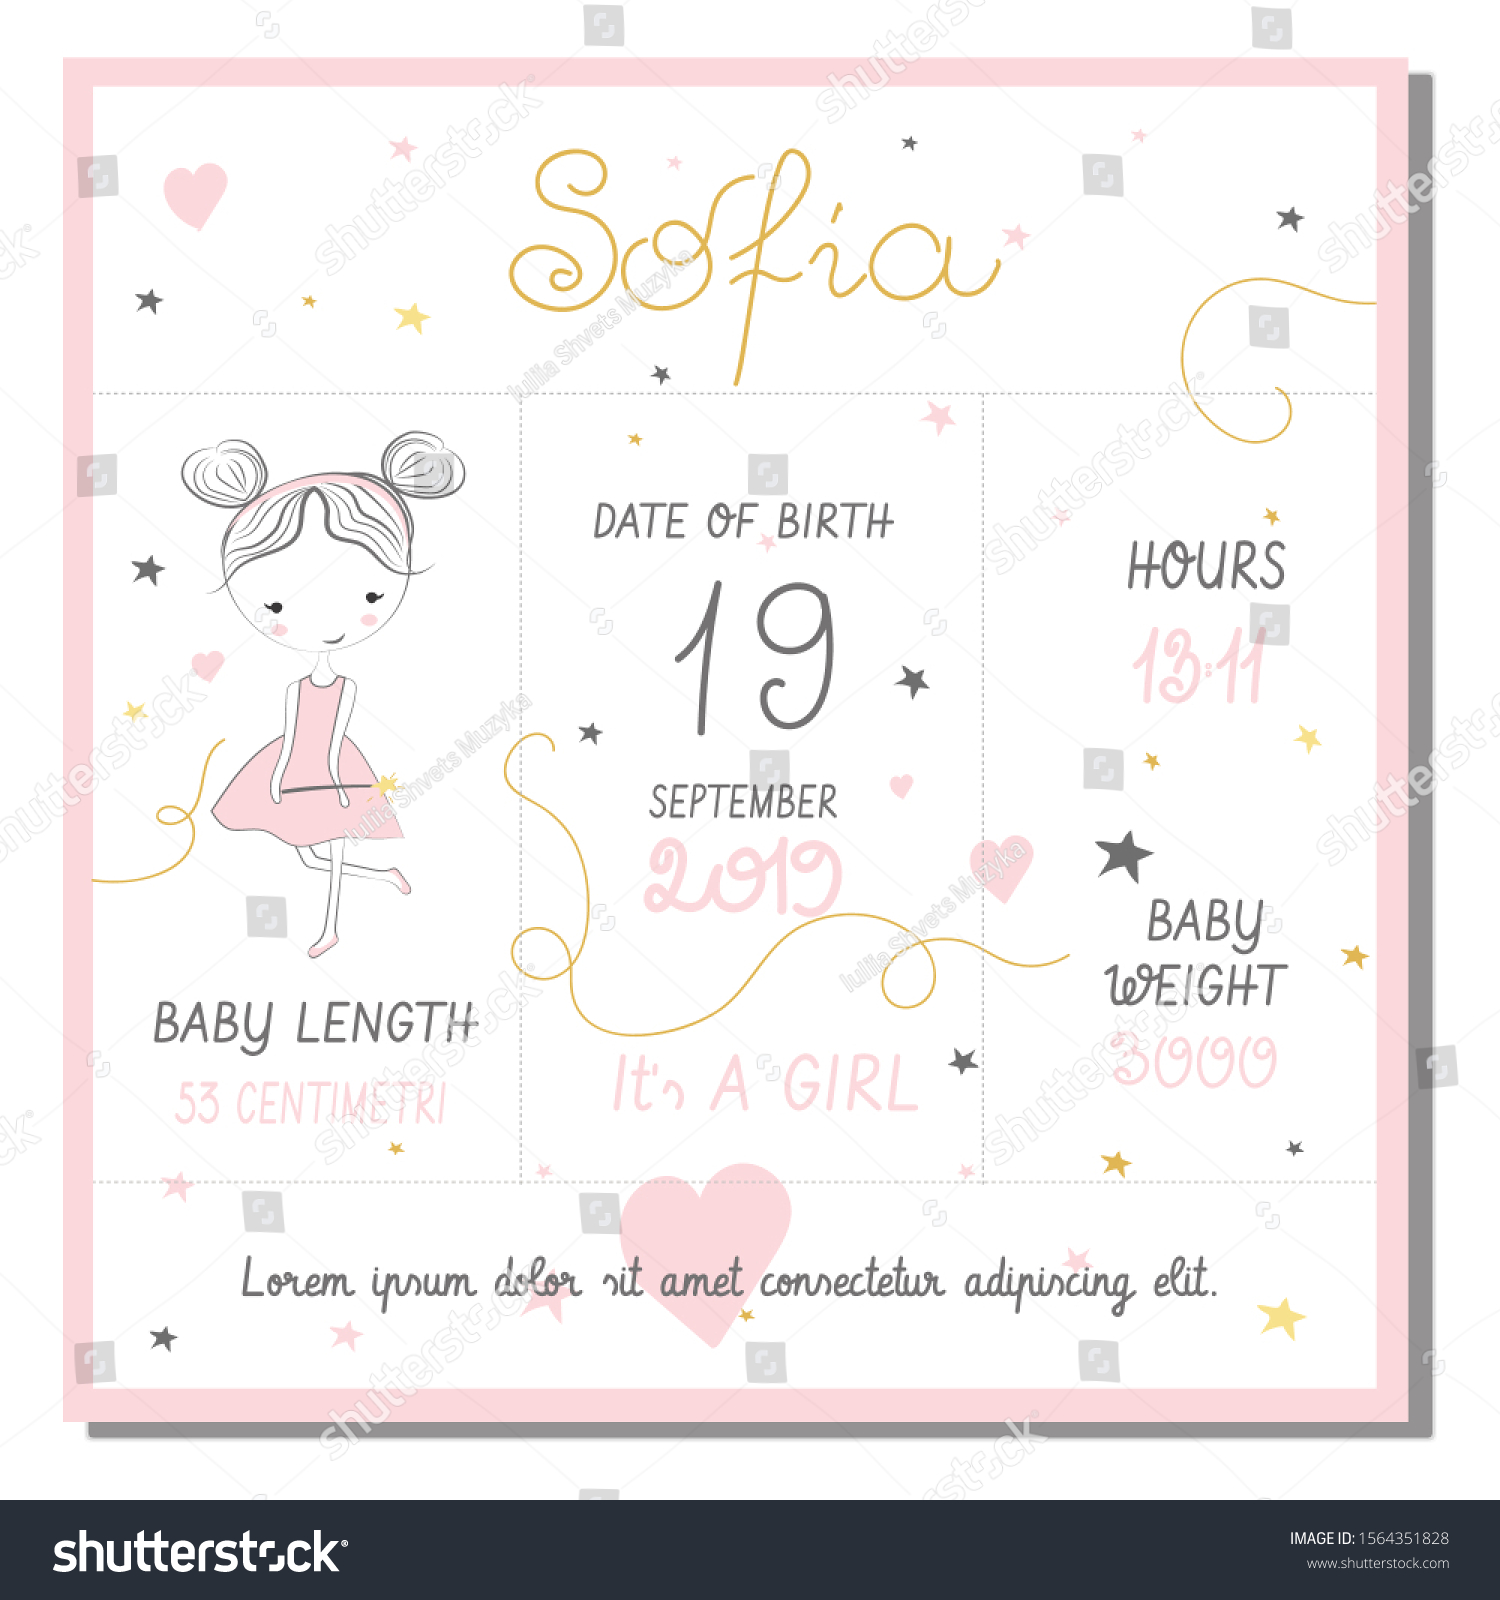 Babies Posters Height Weight Date Birth Stock Vector Royalty Free